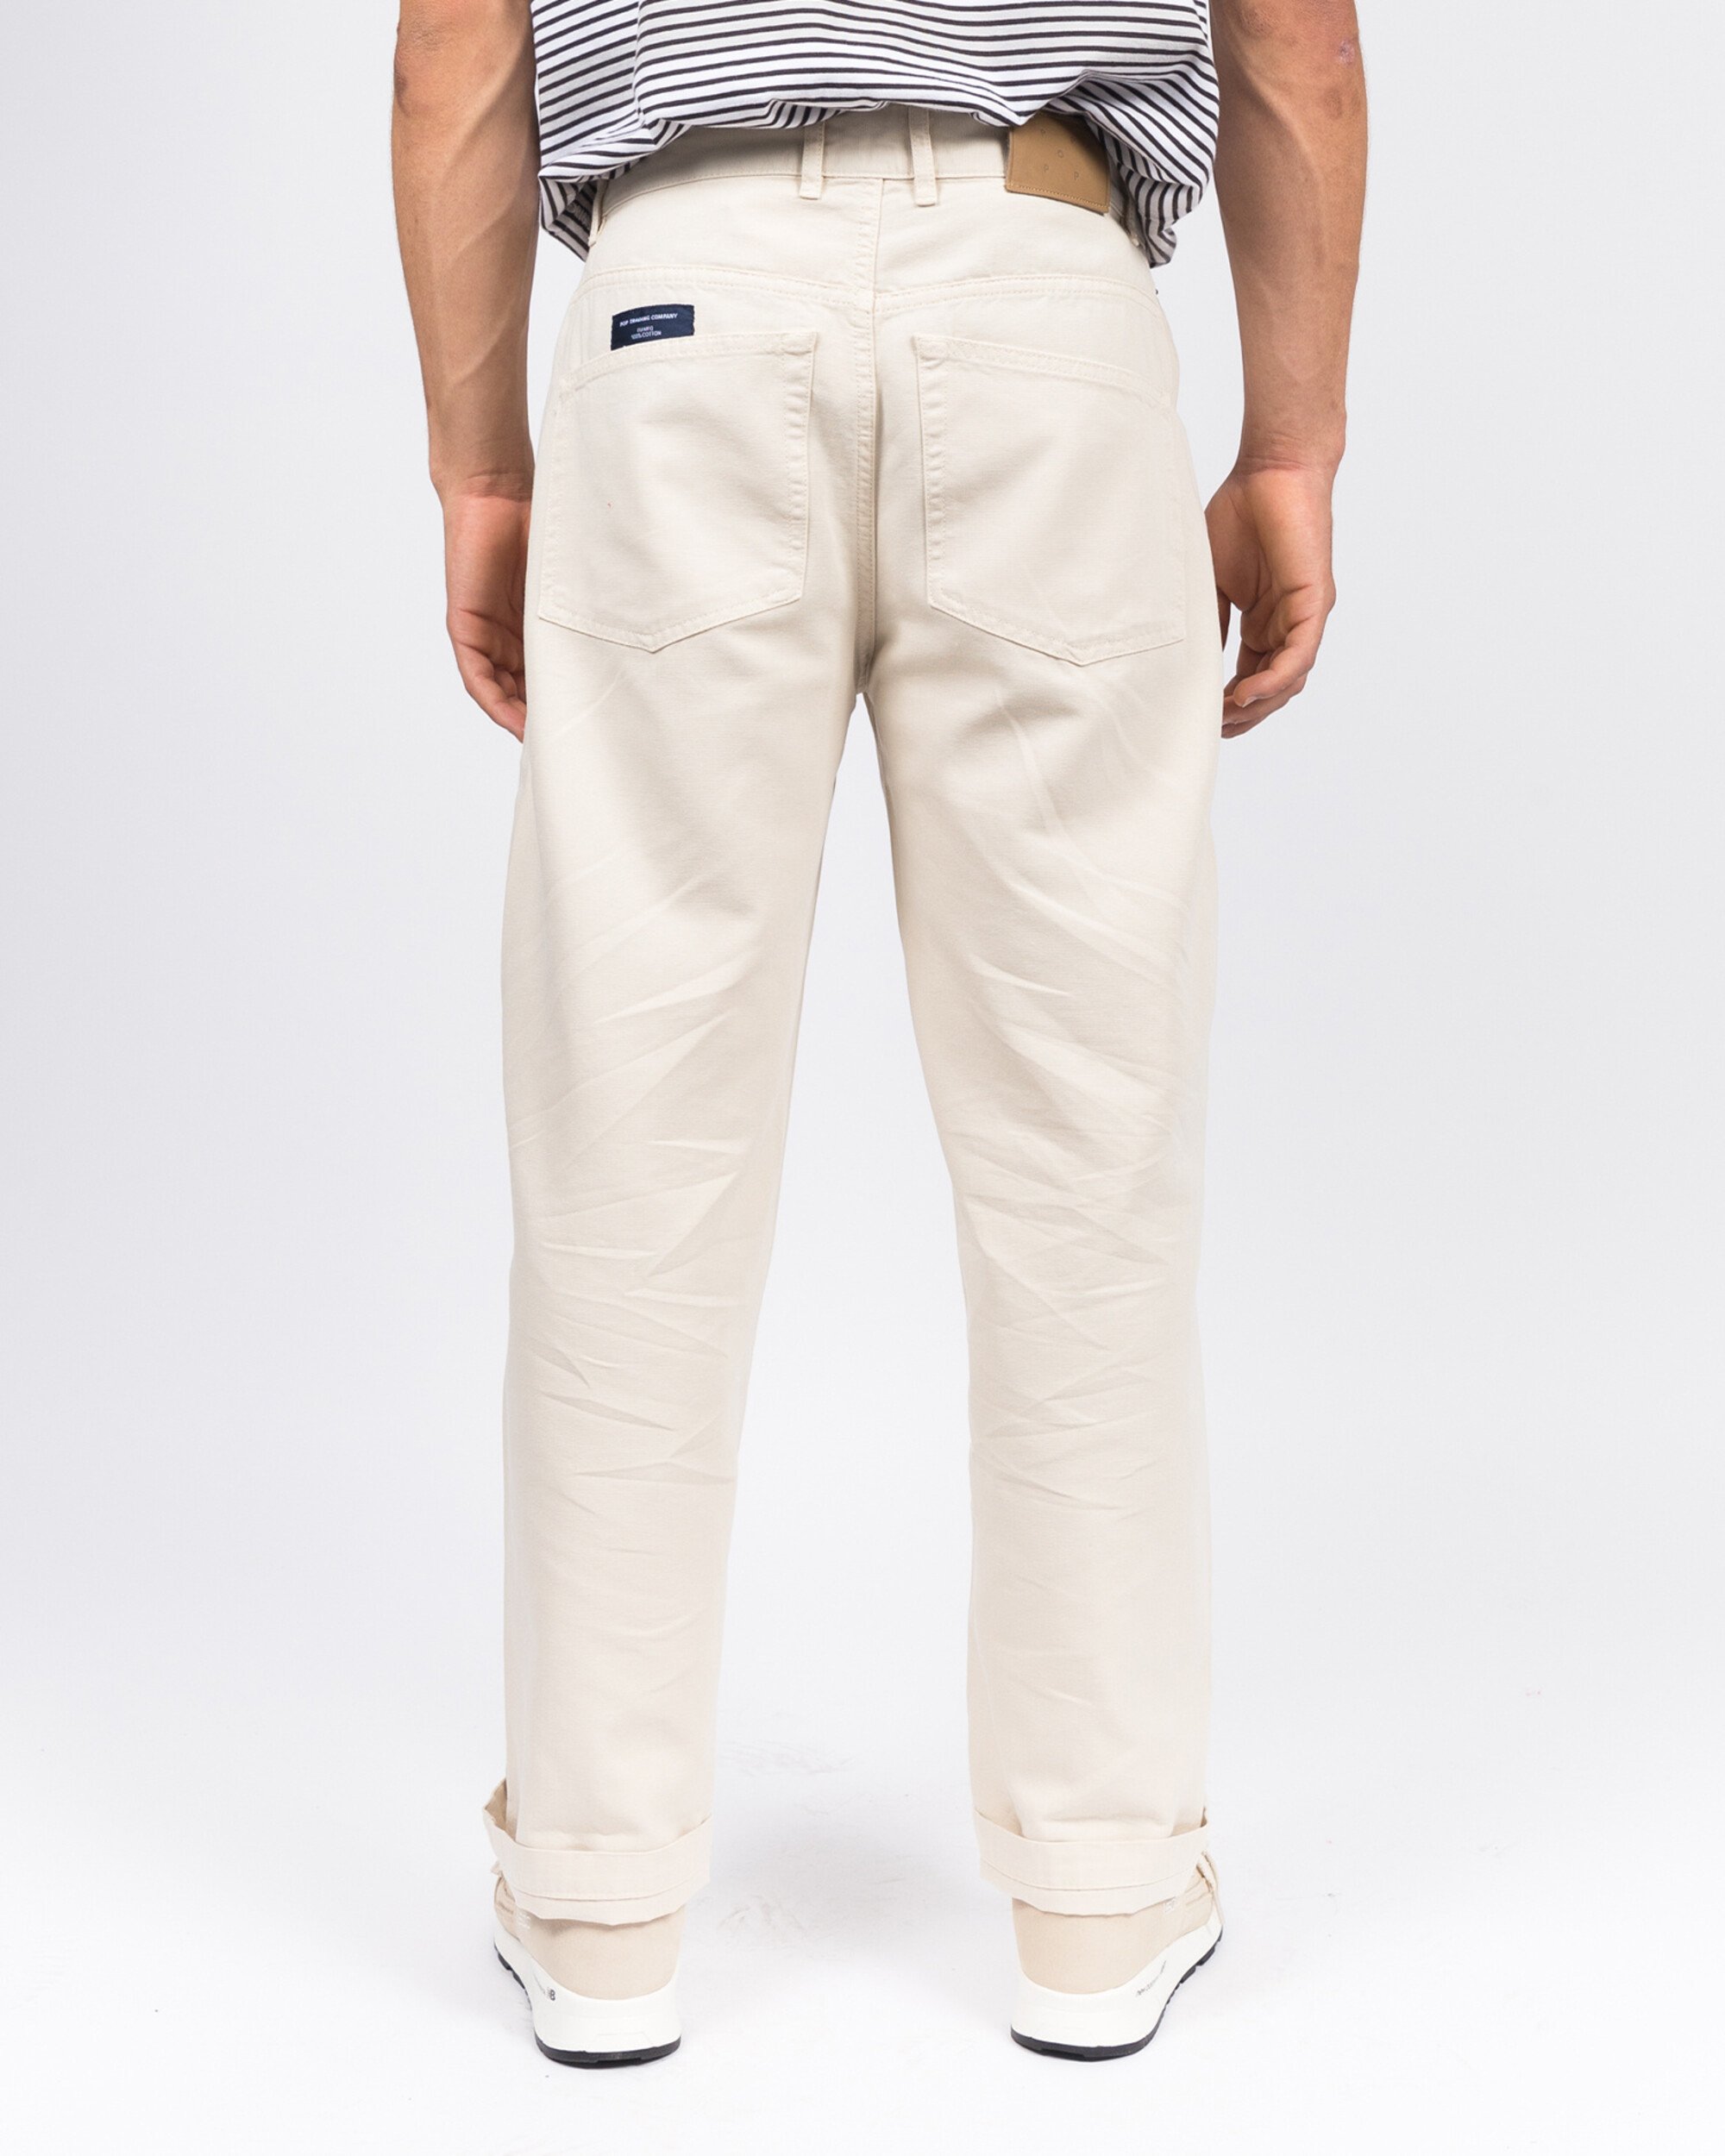 Pop Trading Co DRS pants off white canvas